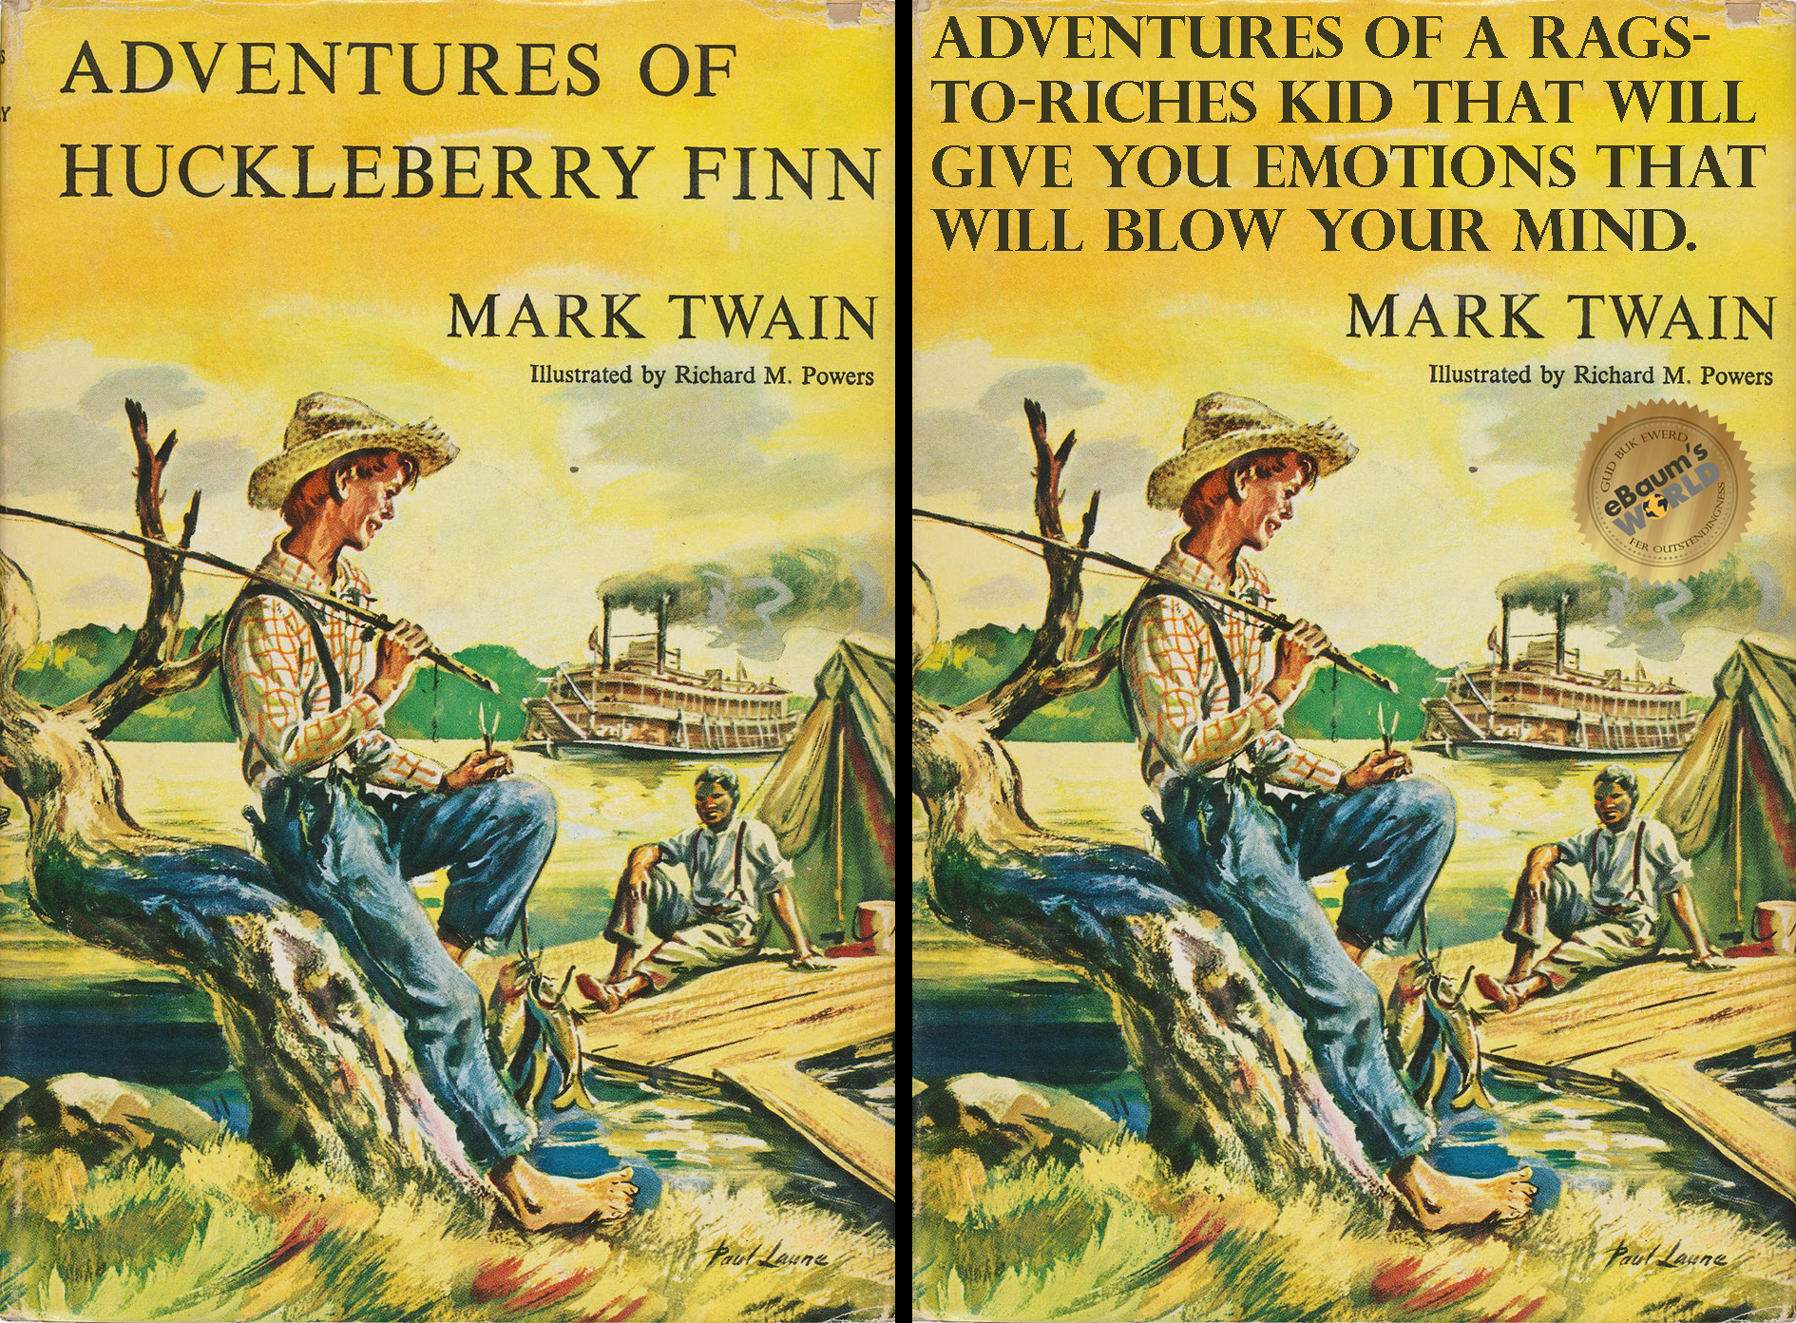 adventures of huckleberry finn - Adventures Of Huckleberry Finn Adventures Of A Rags ToRiches Kid That Will Give You Emotions That Will Blow Your Mind. Mark Twain Illustrated by Richard M. Powers Mark Twain Illustrated by Richard M. Powers